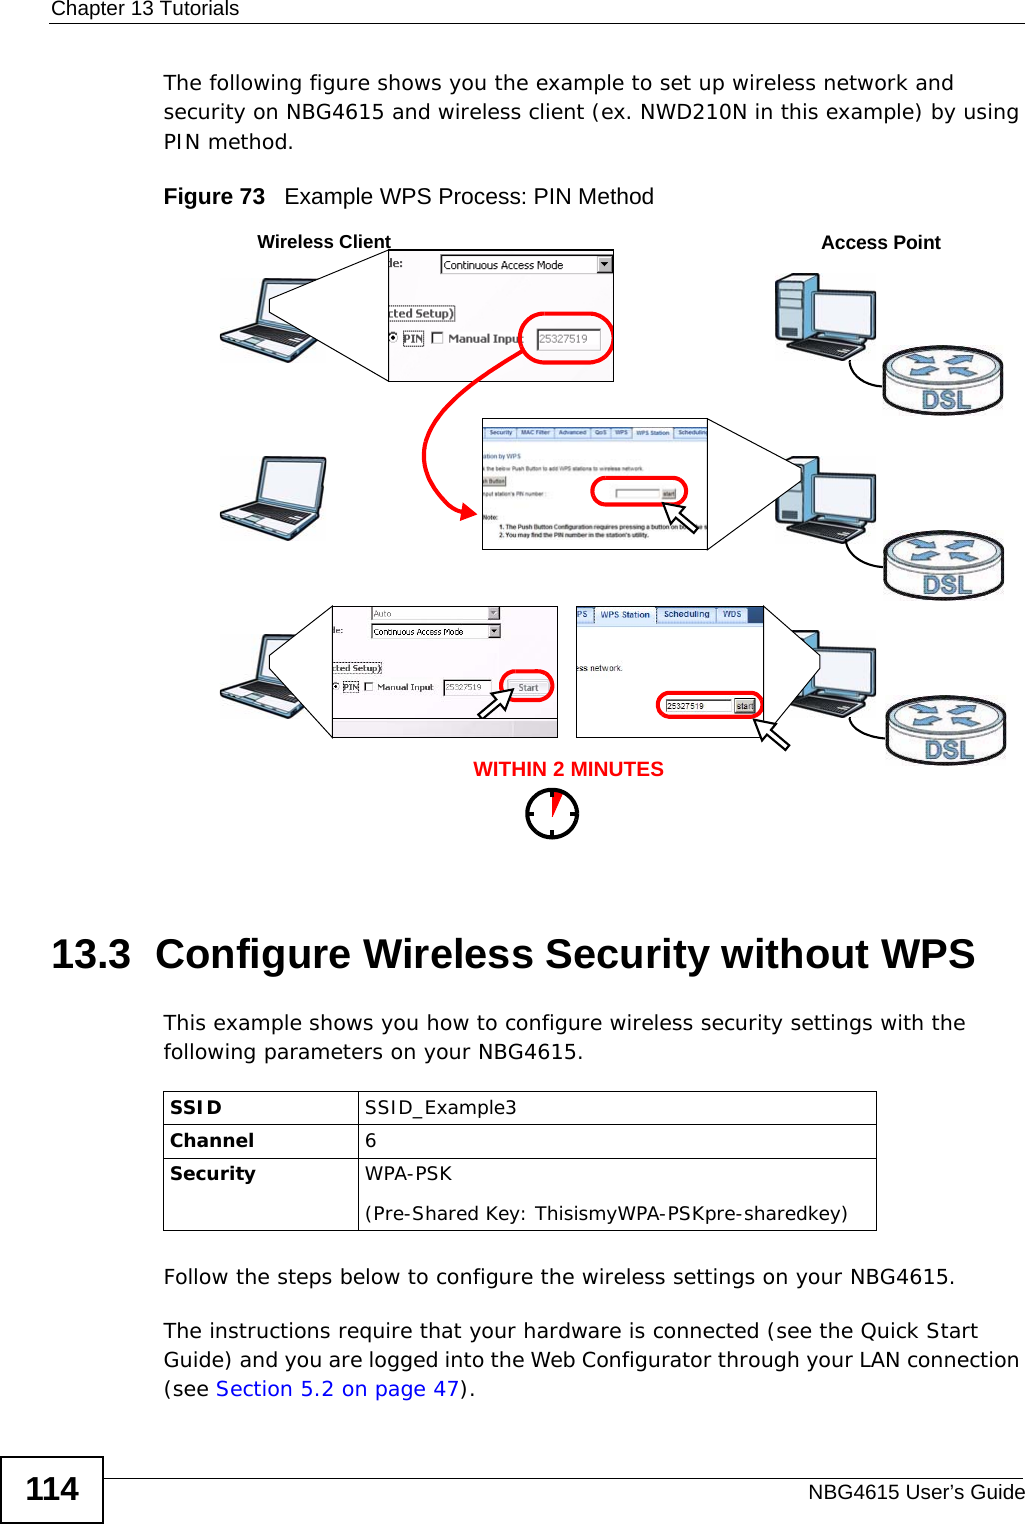 Chapter 13 TutorialsNBG4615 User’s Guide114The following figure shows you the example to set up wireless network and security on NBG4615 and wireless client (ex. NWD210N in this example) by using PIN method. Figure 73   Example WPS Process: PIN Method13.3  Configure Wireless Security without WPSThis example shows you how to configure wireless security settings with the following parameters on your NBG4615.Follow the steps below to configure the wireless settings on your NBG4615.The instructions require that your hardware is connected (see the Quick Start Guide) and you are logged into the Web Configurator through your LAN connection (see Section 5.2 on page 47).WITHIN 2 MINUTESWireless ClientAccess PointSSID SSID_Example3Channel 6Security  WPA-PSK(Pre-Shared Key: ThisismyWPA-PSKpre-sharedkey)